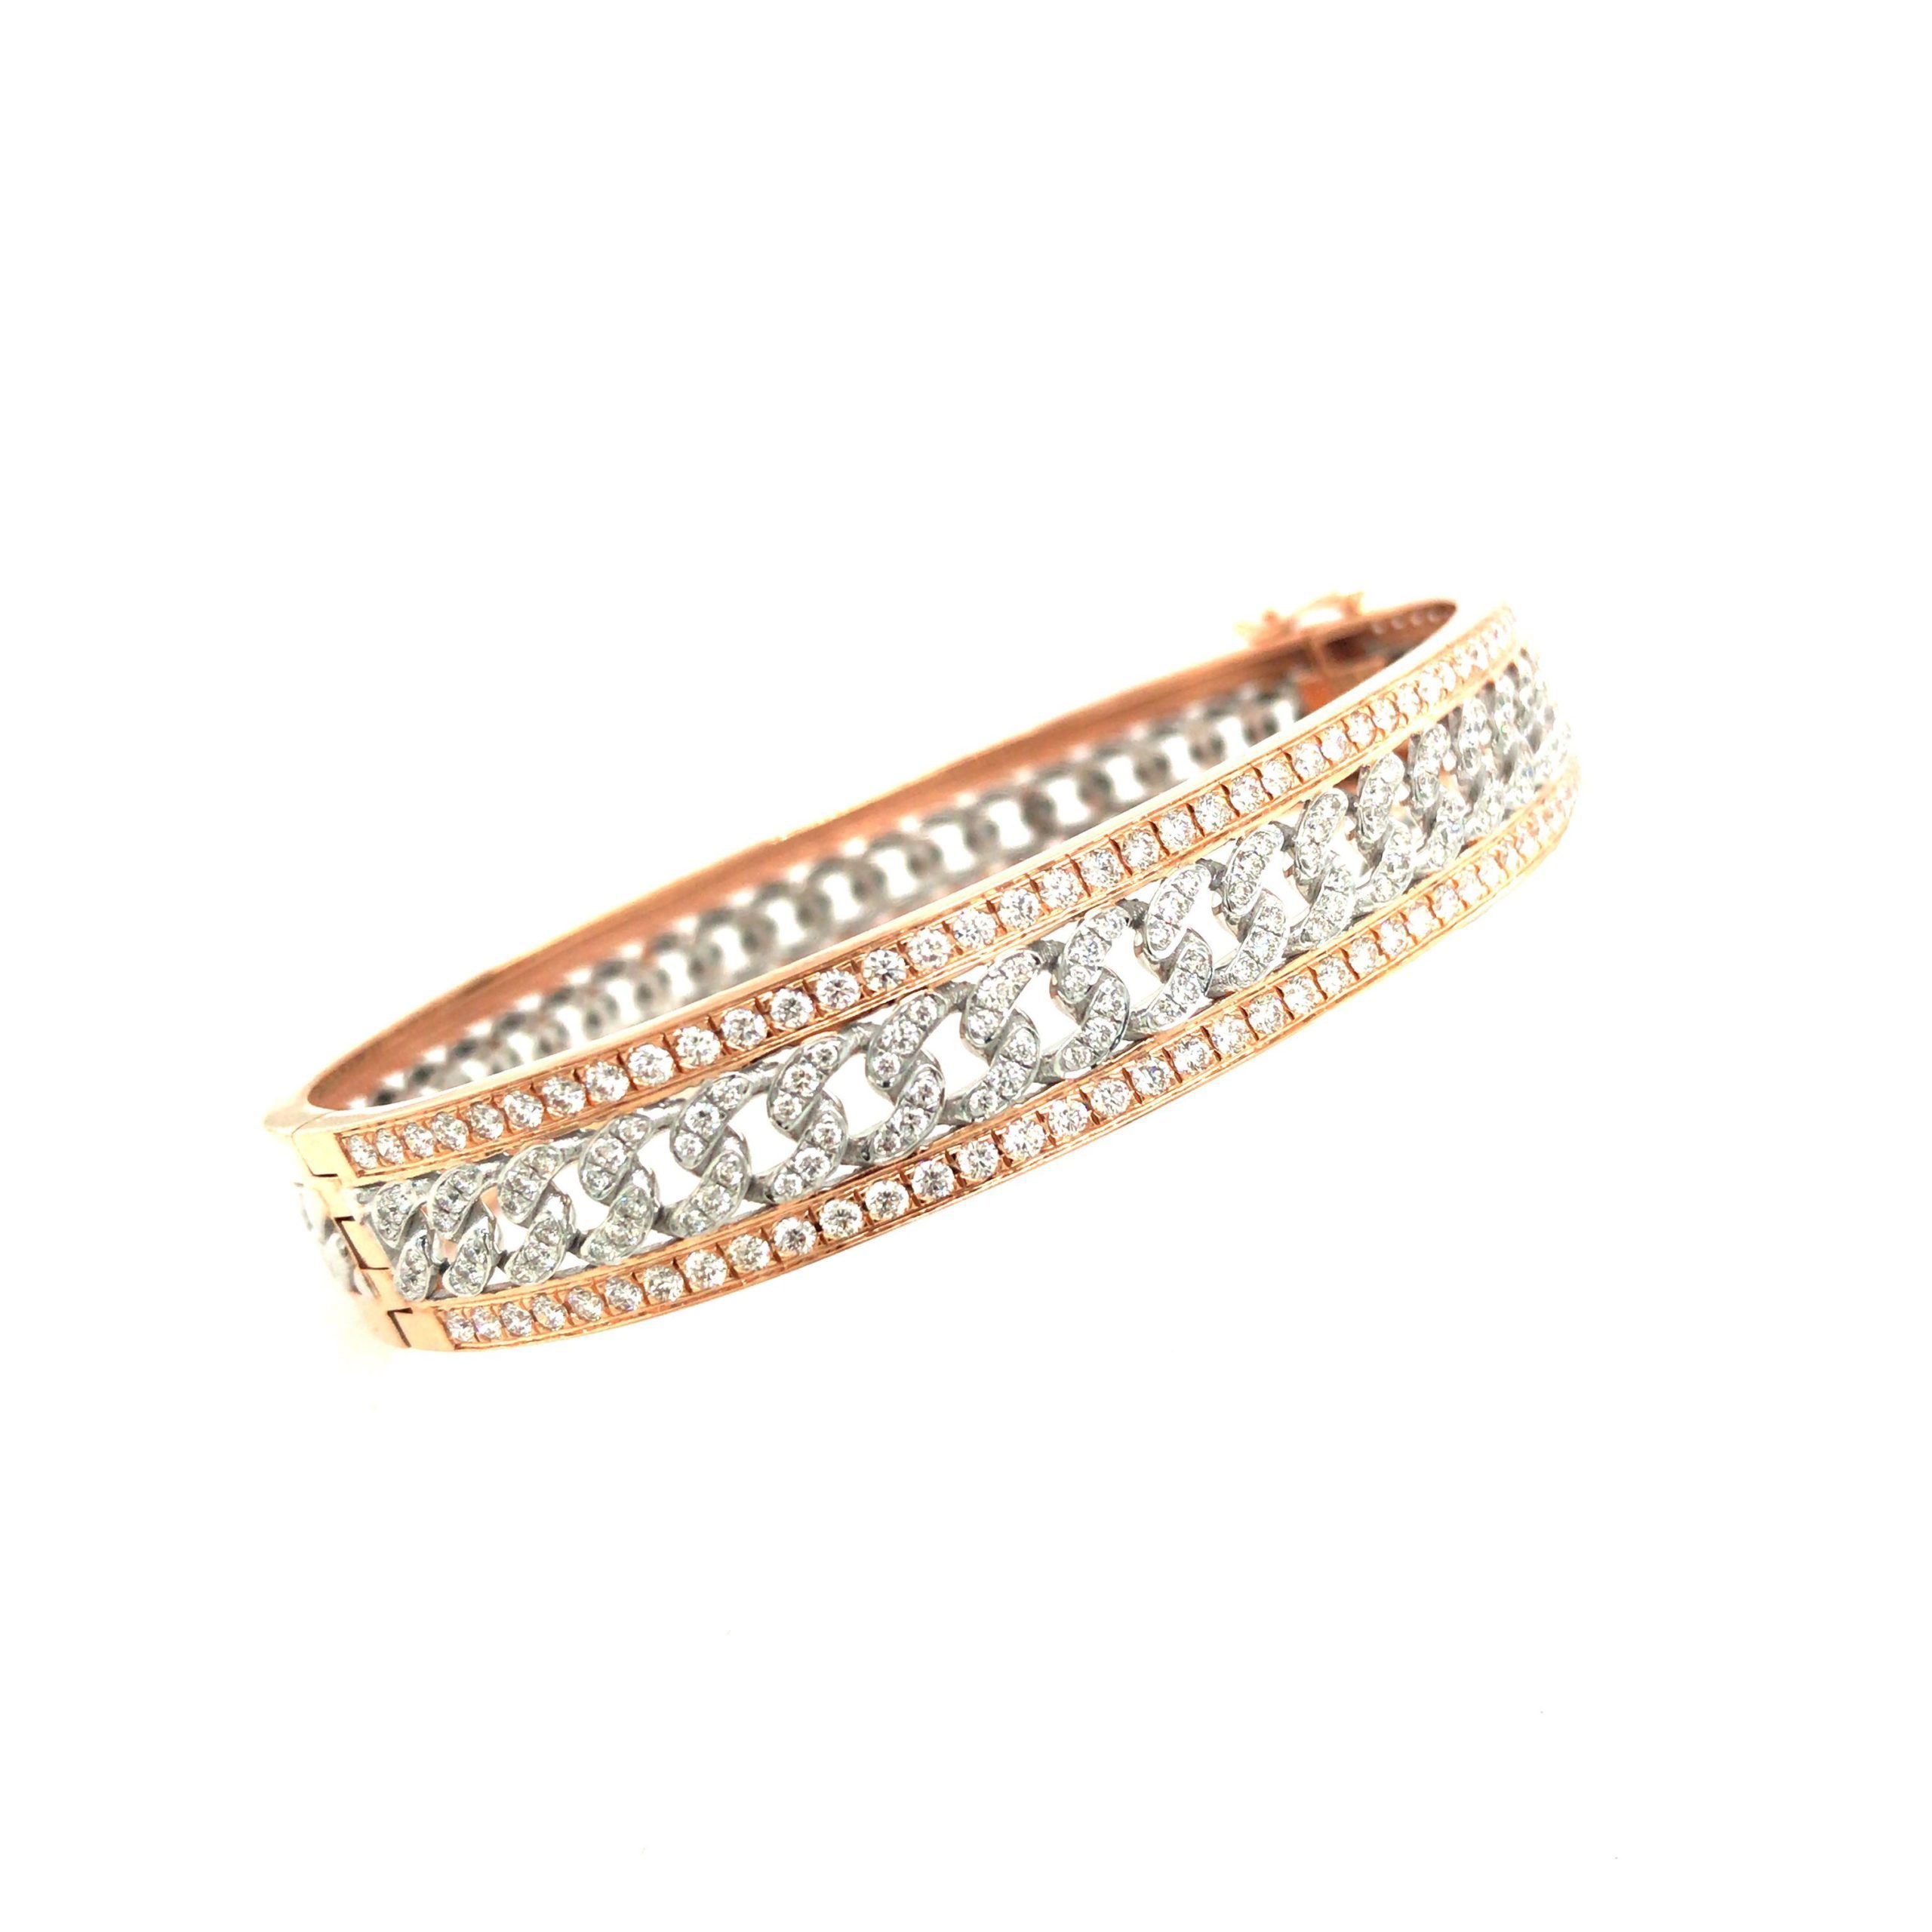 Gold And Diamond Bracelet Available For Immediate Sale At Sotheby's